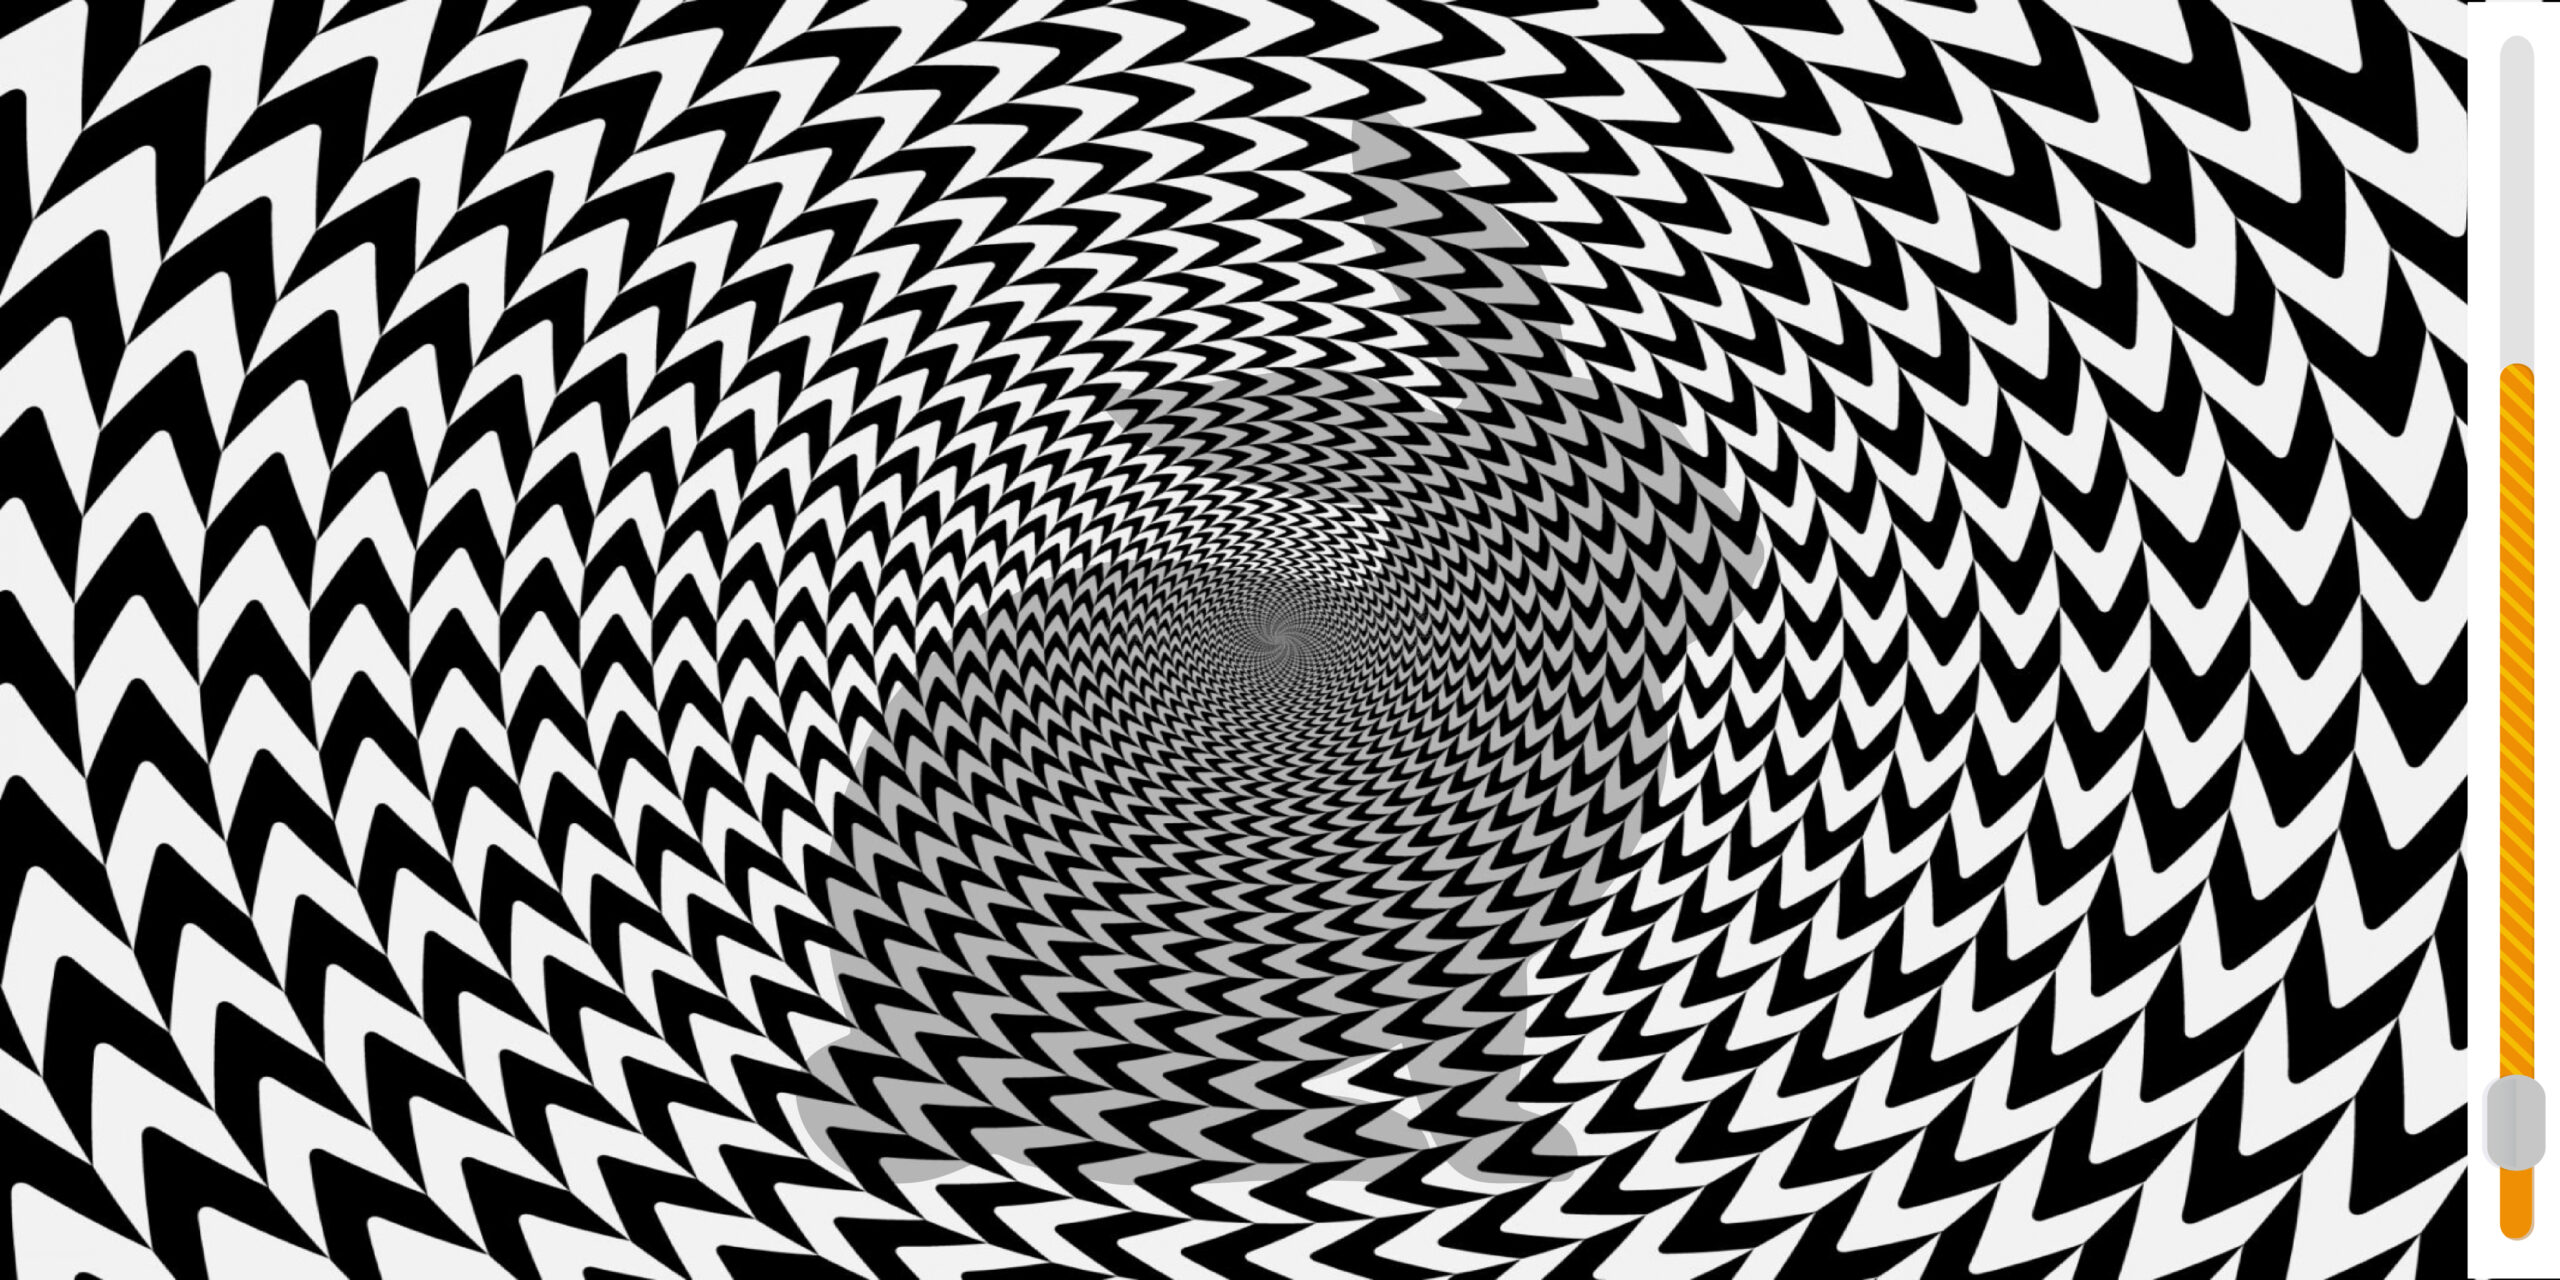 brain teasers illusions and optical illusions